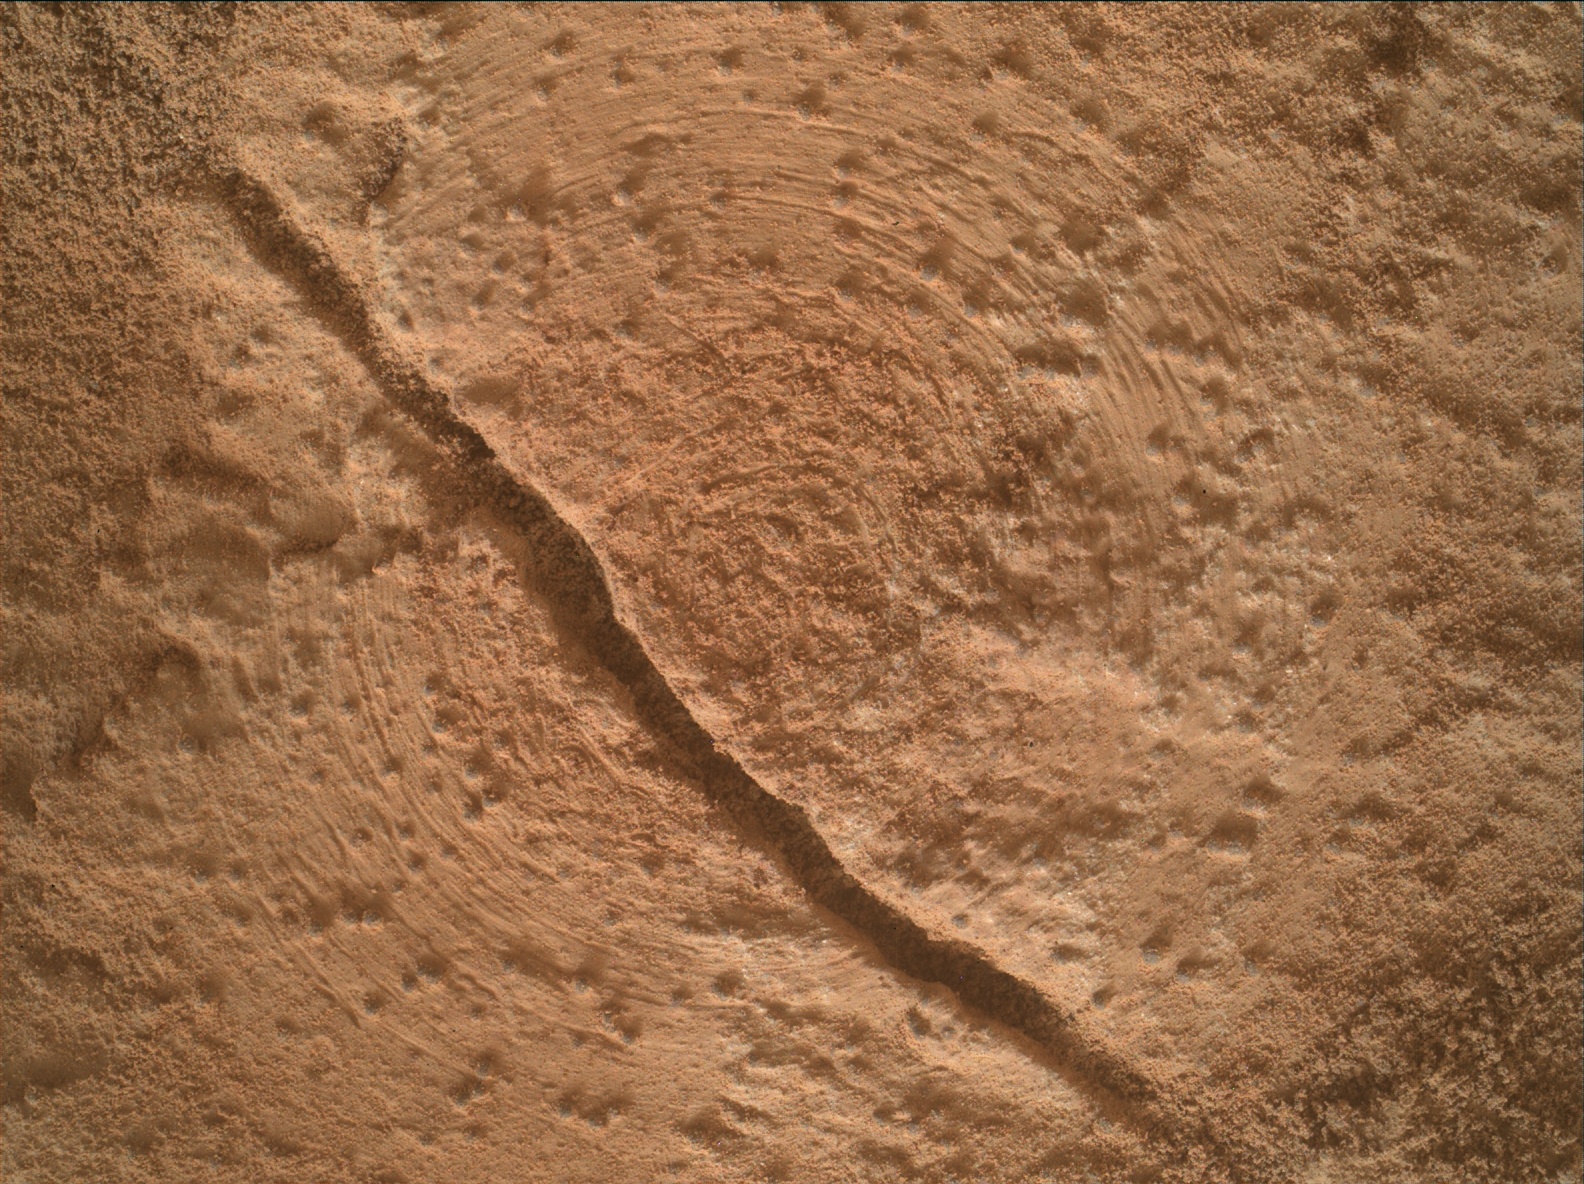 Nasa's Mars rover Curiosity acquired this image using its Mars Hand Lens Imager (MAHLI) on Sol 3474